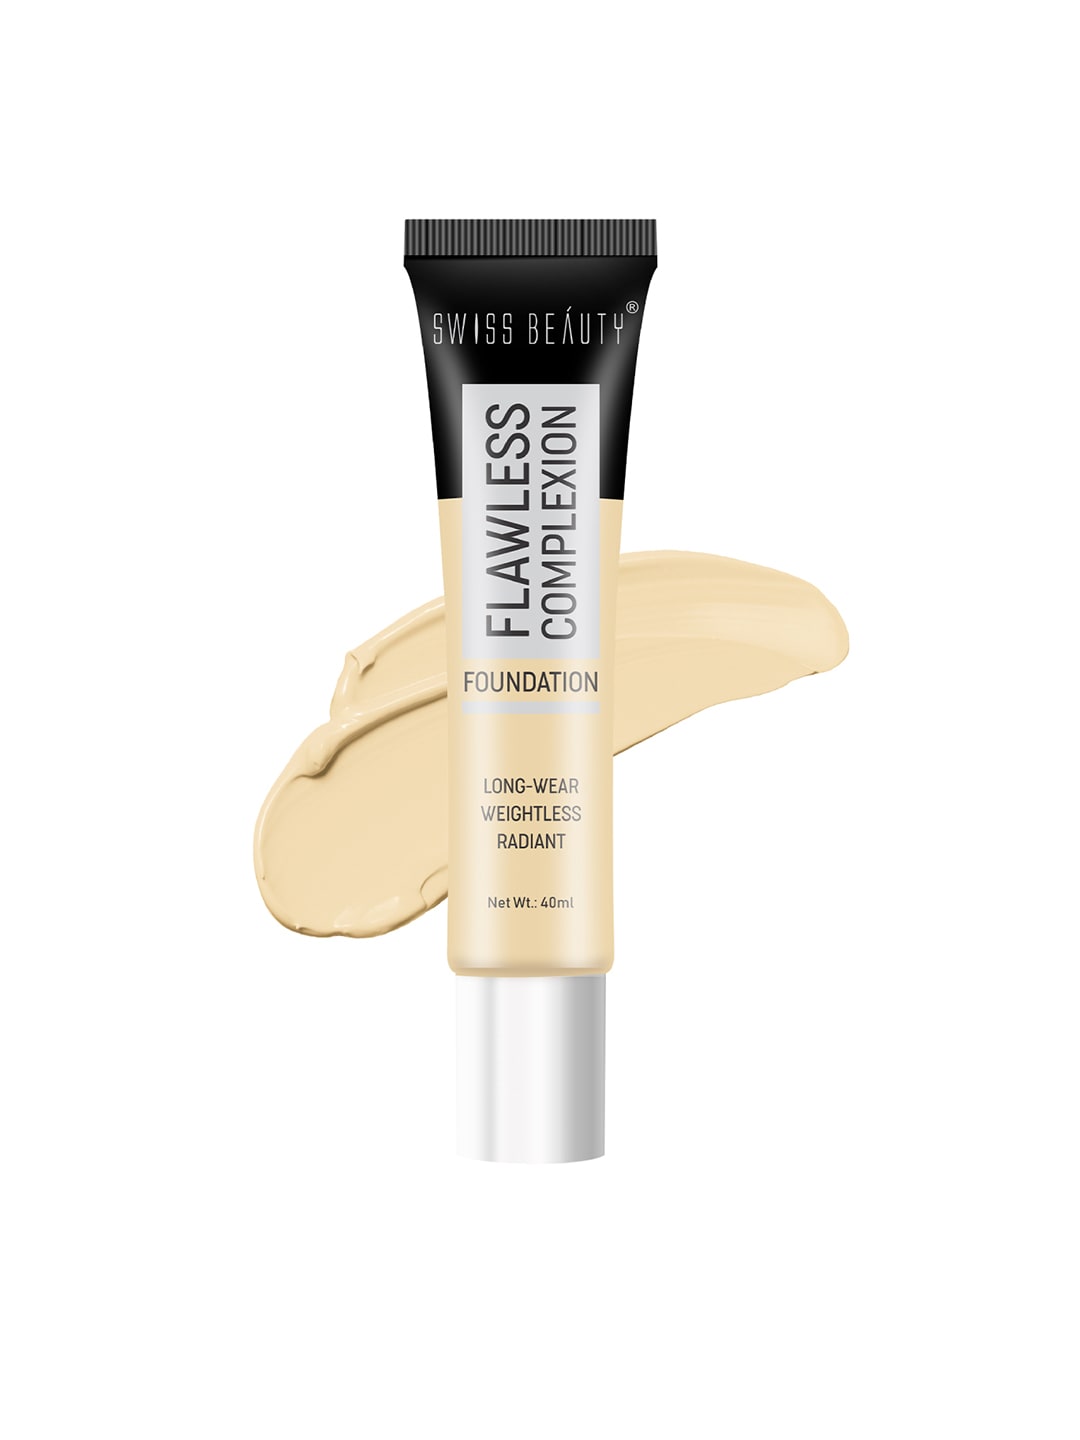 SWISS BEAUTY Flawless Complexion Foundation - Ivory Fair Price in India